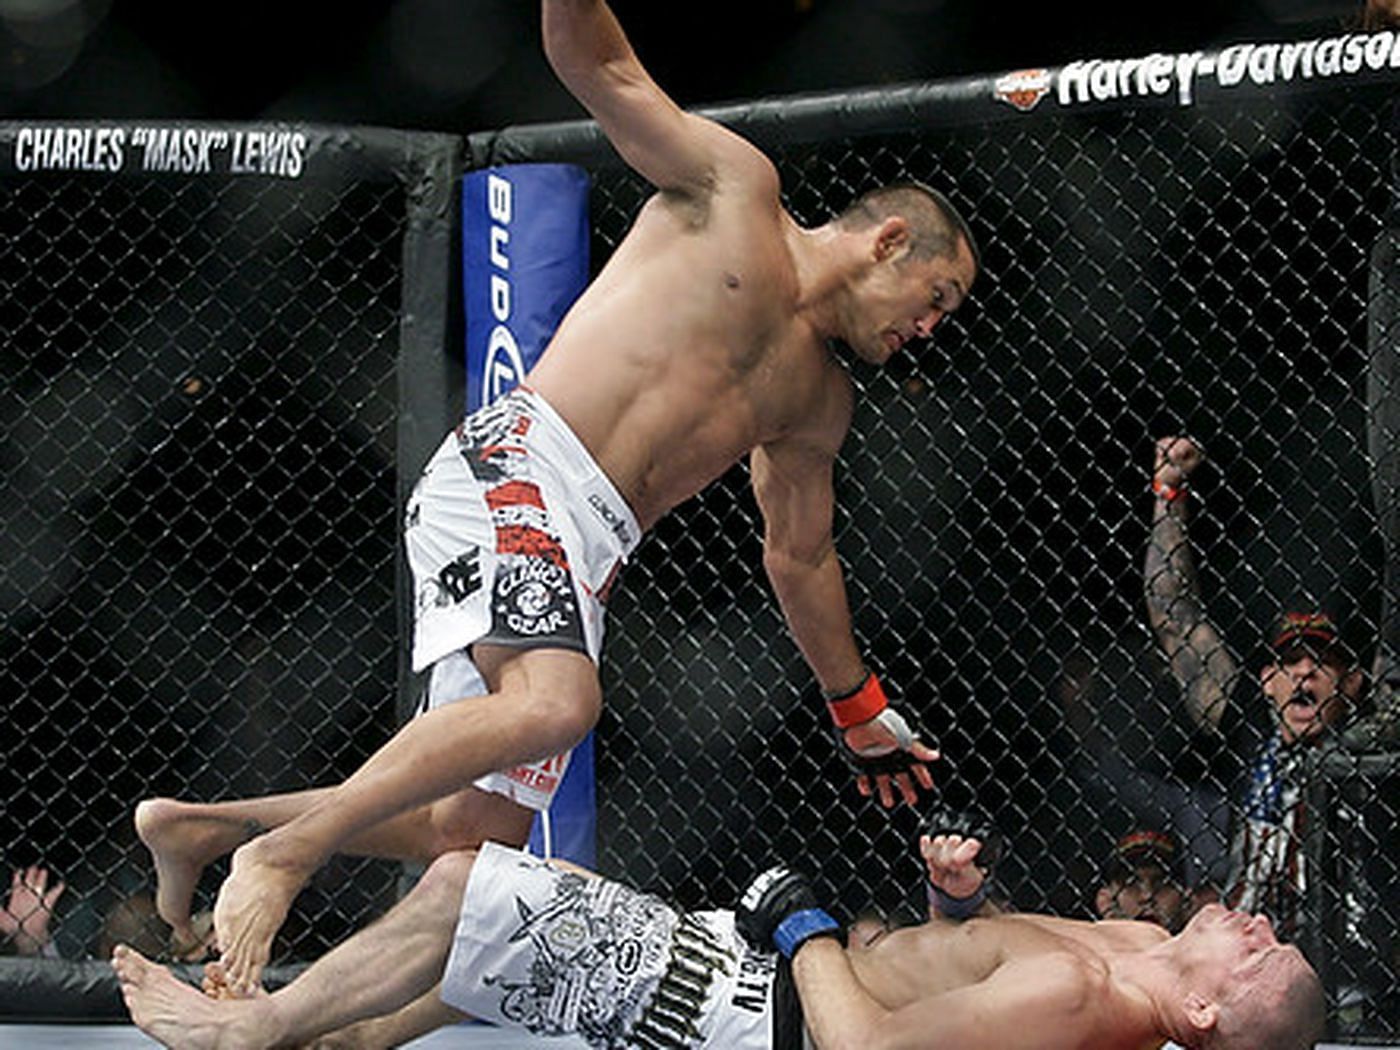 The UFC let Dan Henderson leave at the height of his popularity in 2009